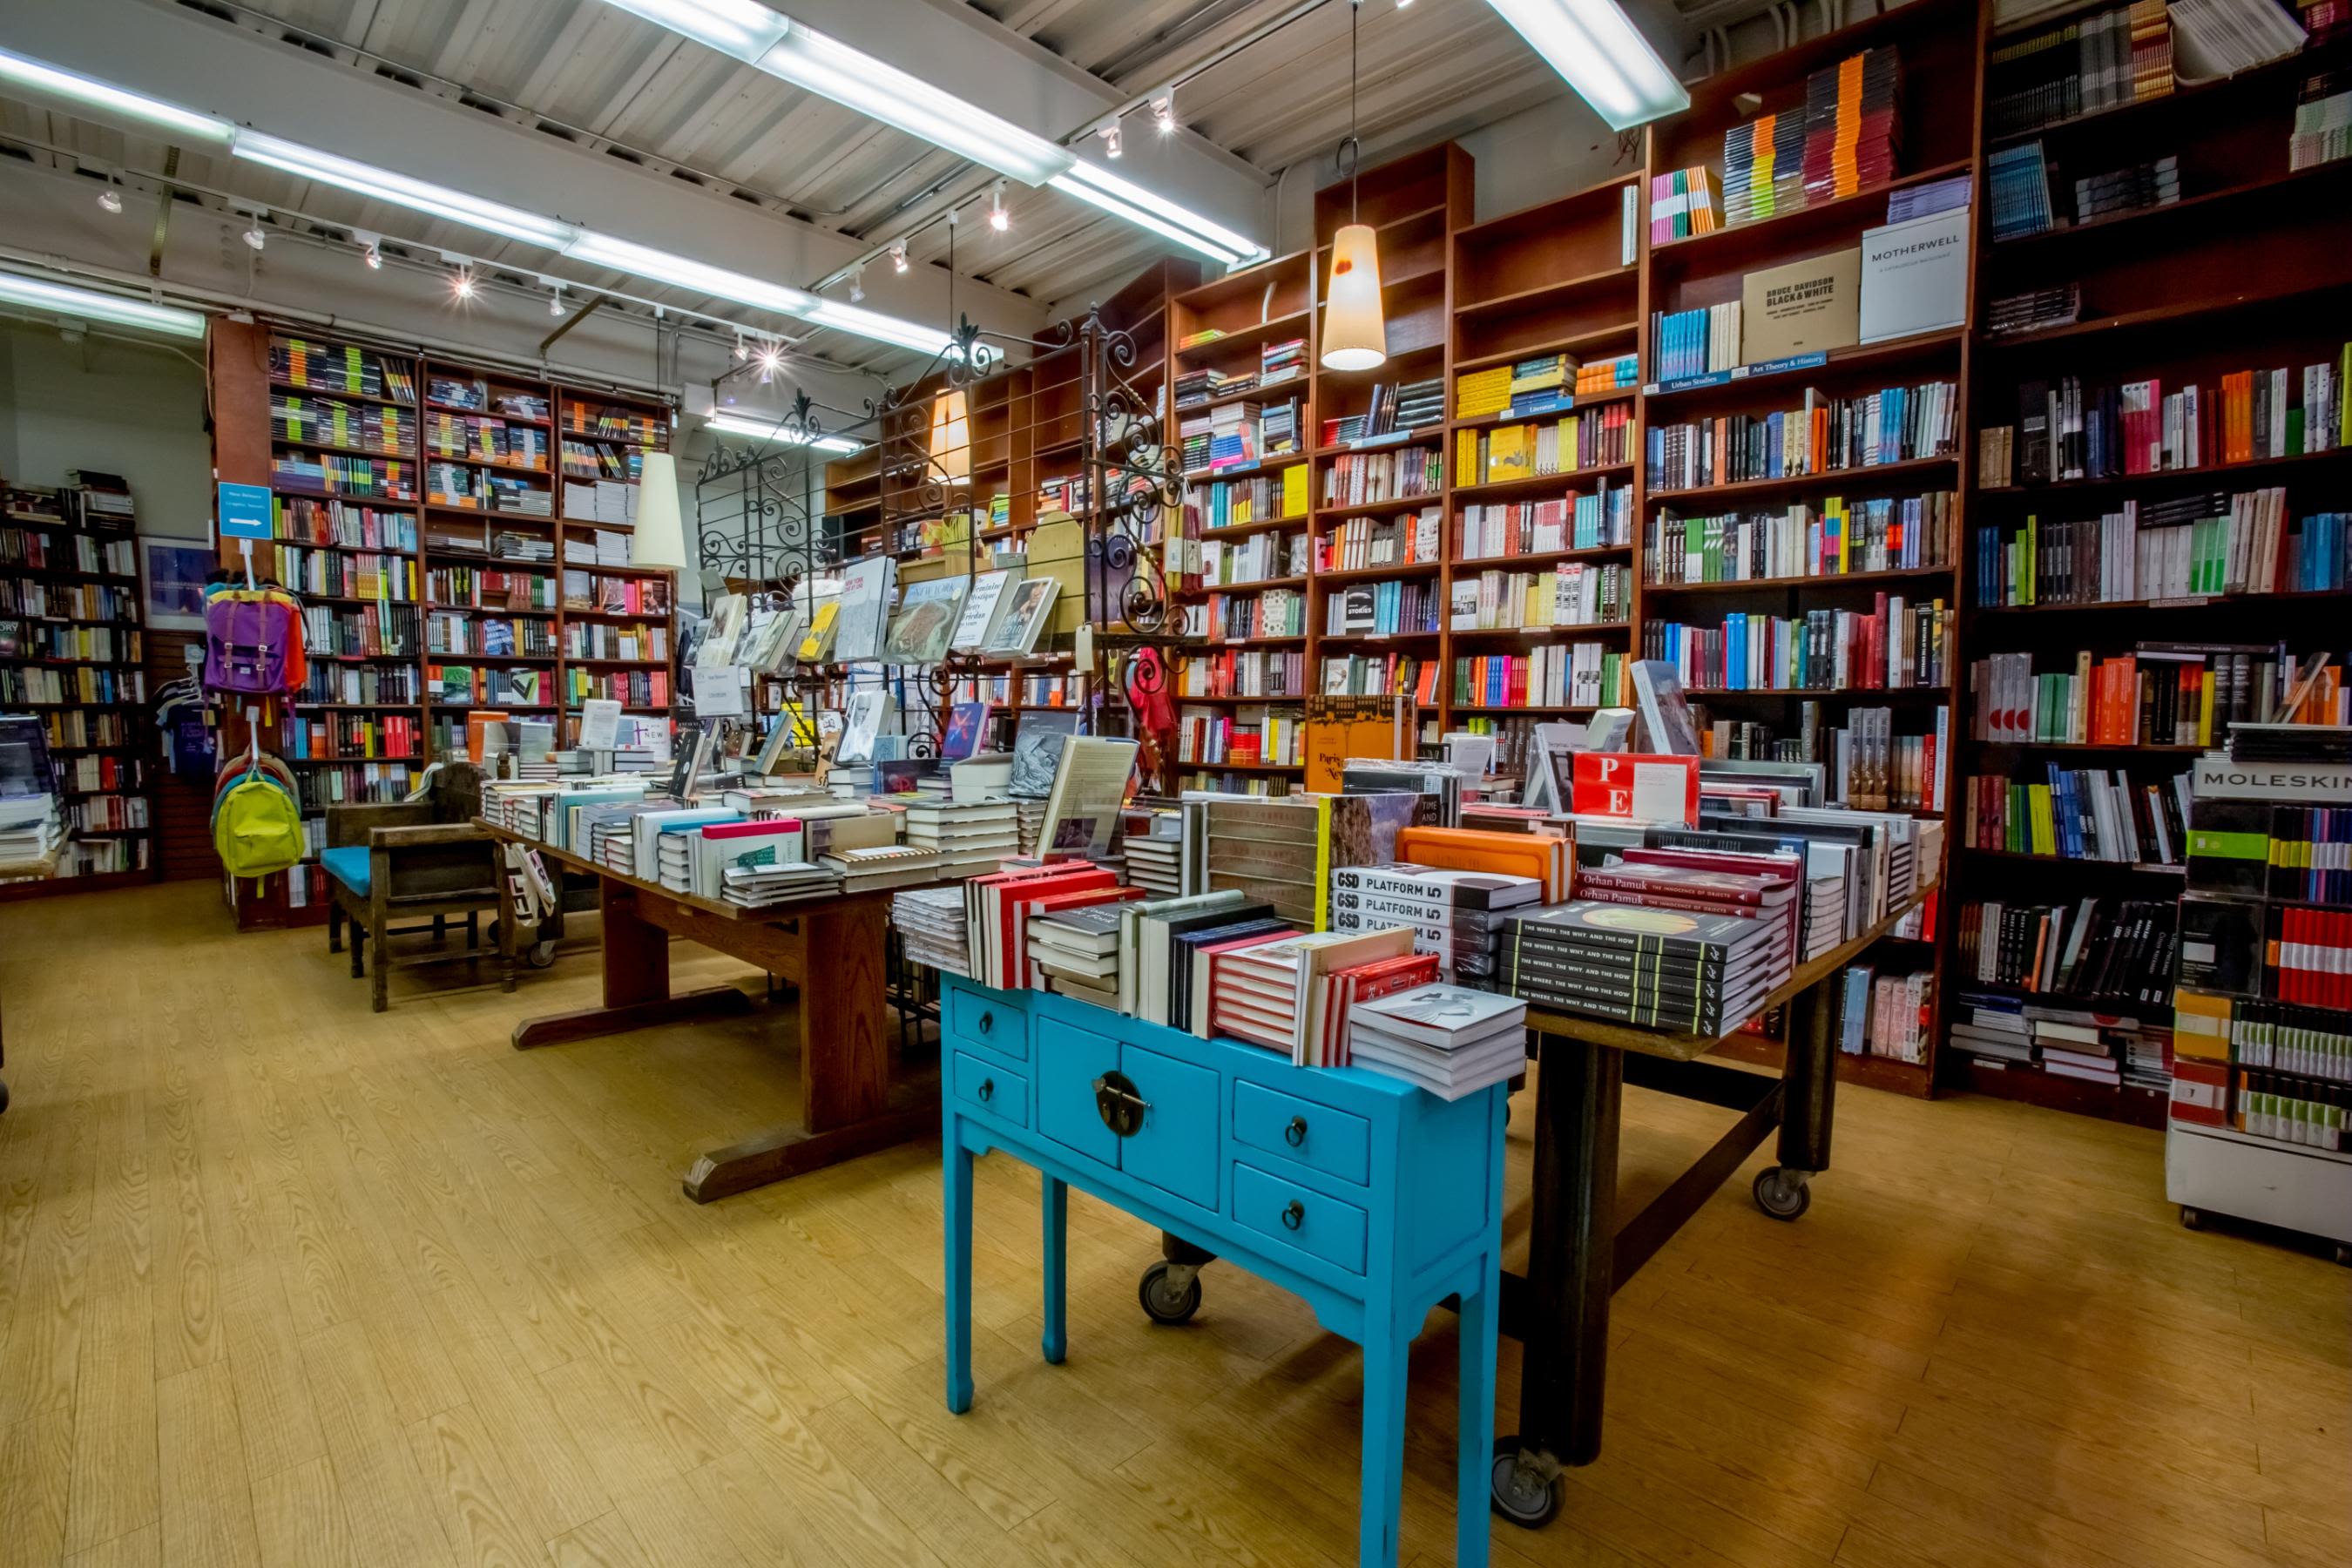 Partnering with Indie Bookstores on Book Fairs